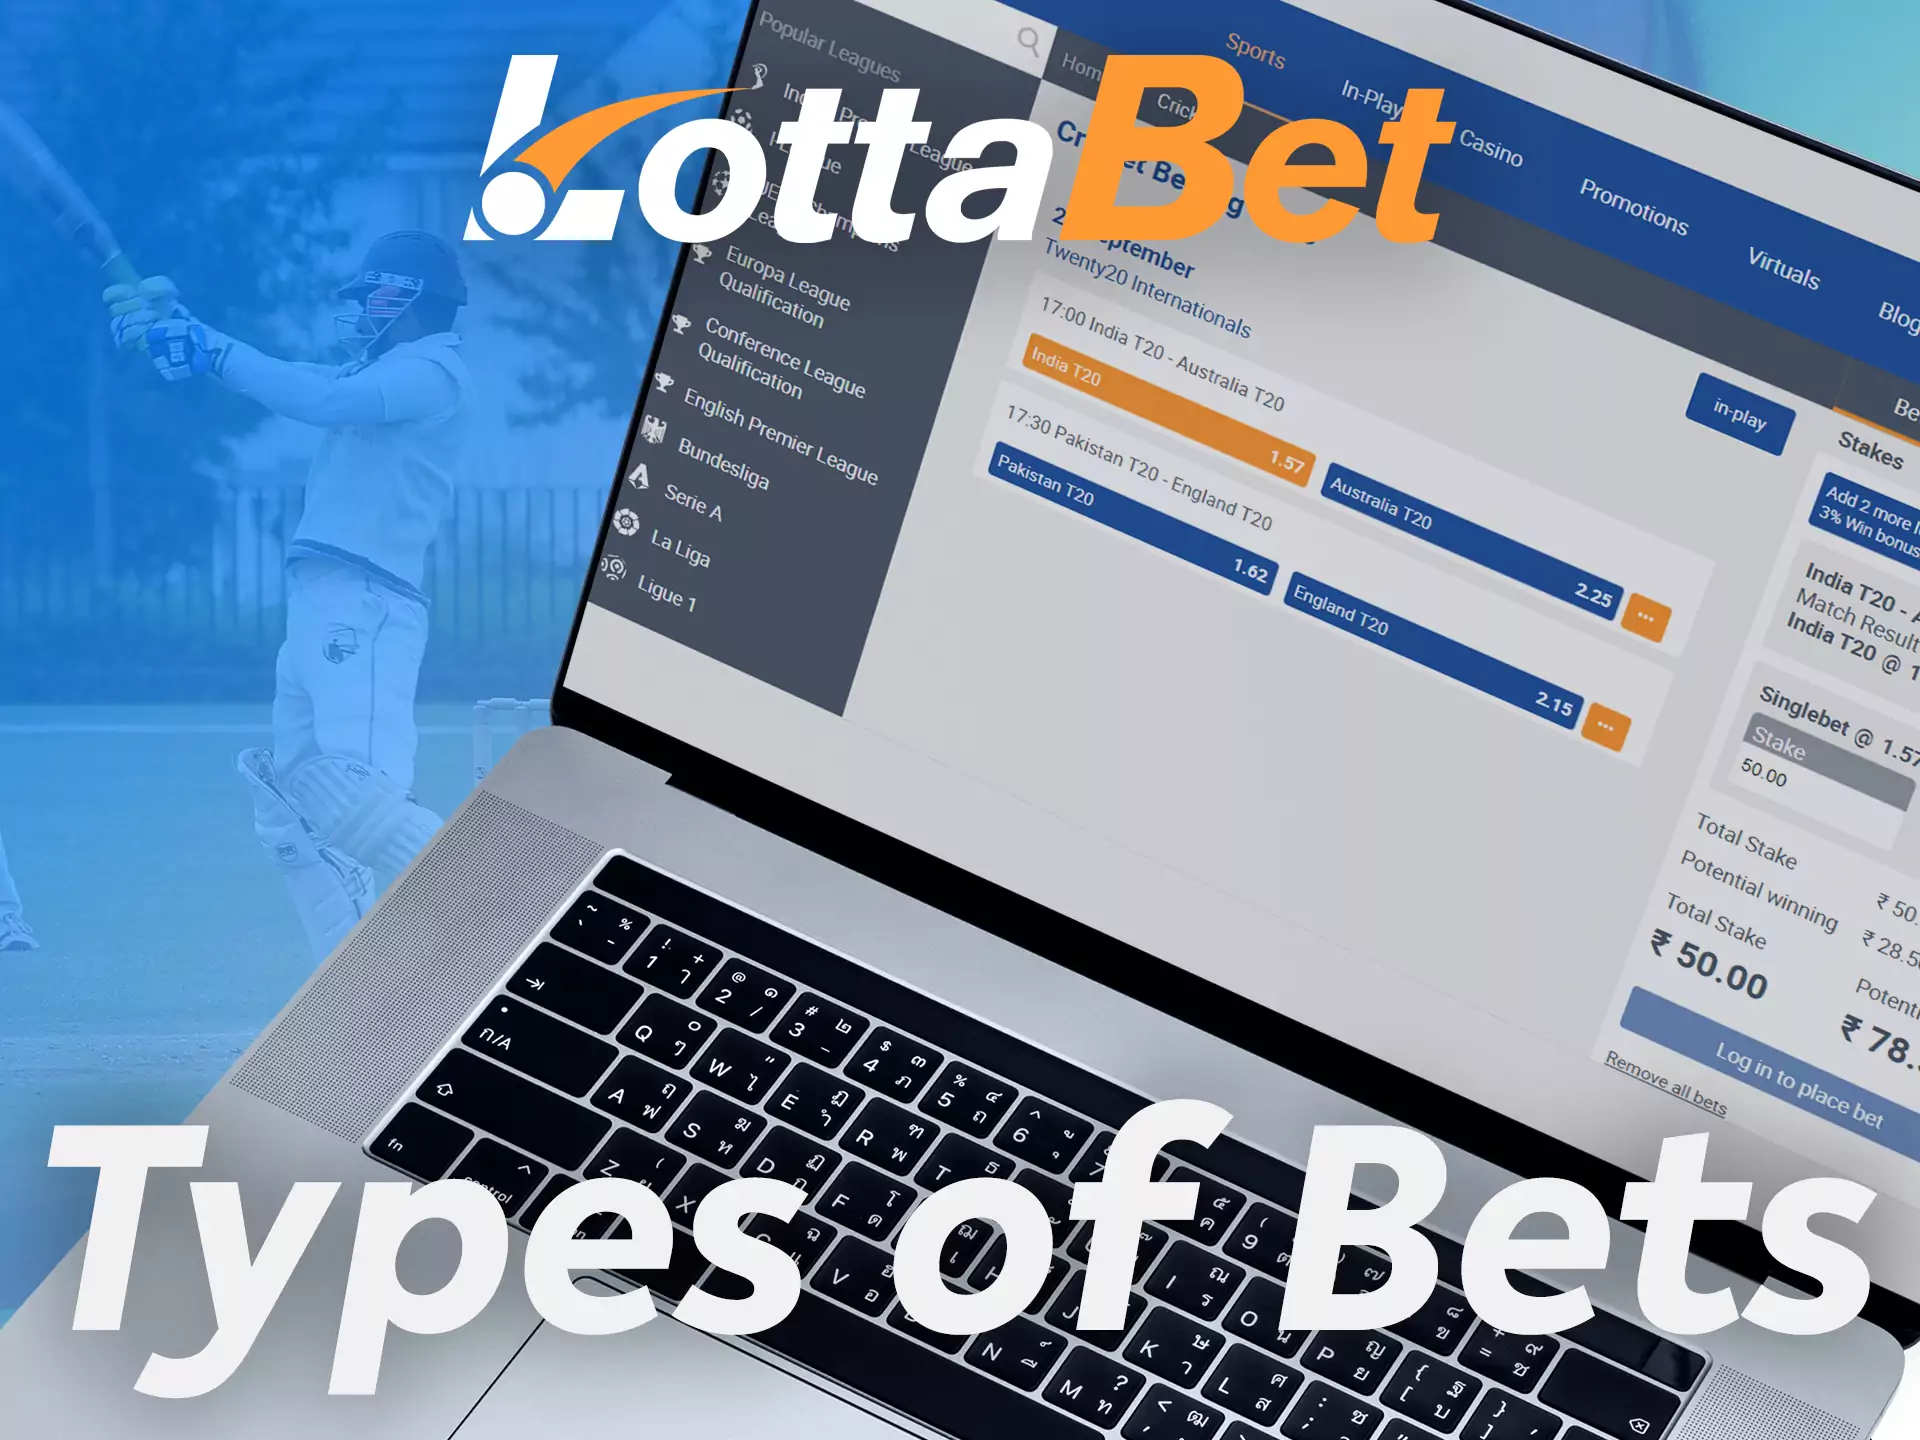 You can choose different types of bets on Lottabet.